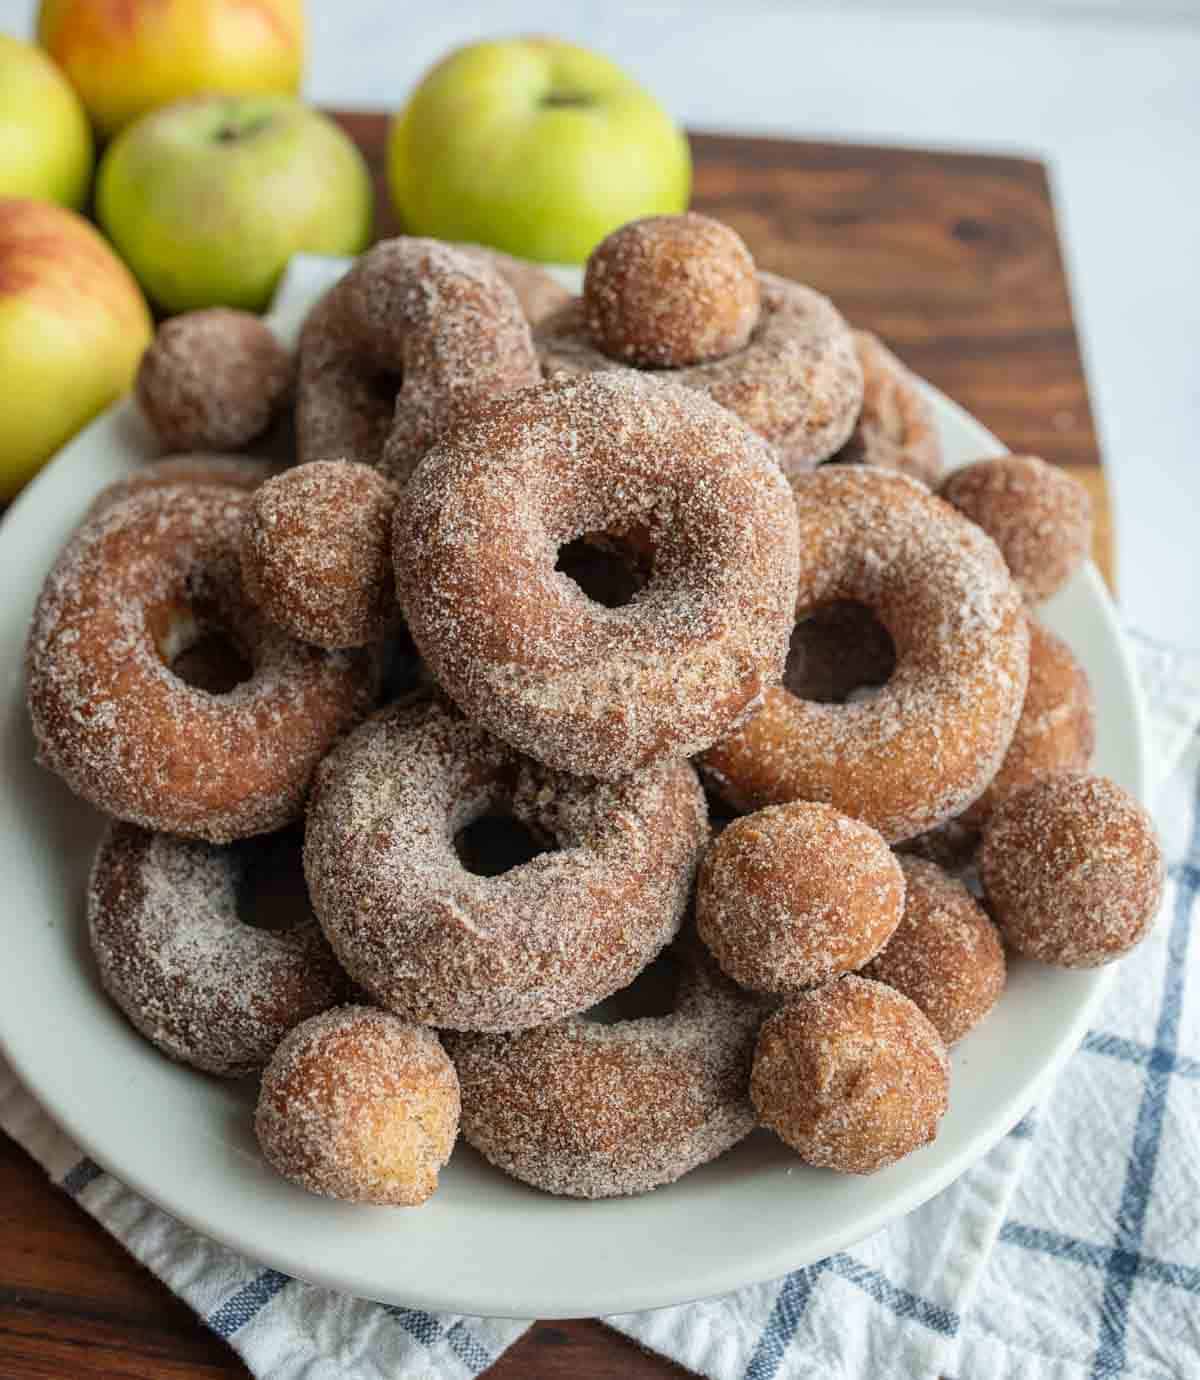 apple cider donuts and holes dusted with sugar on a white plate